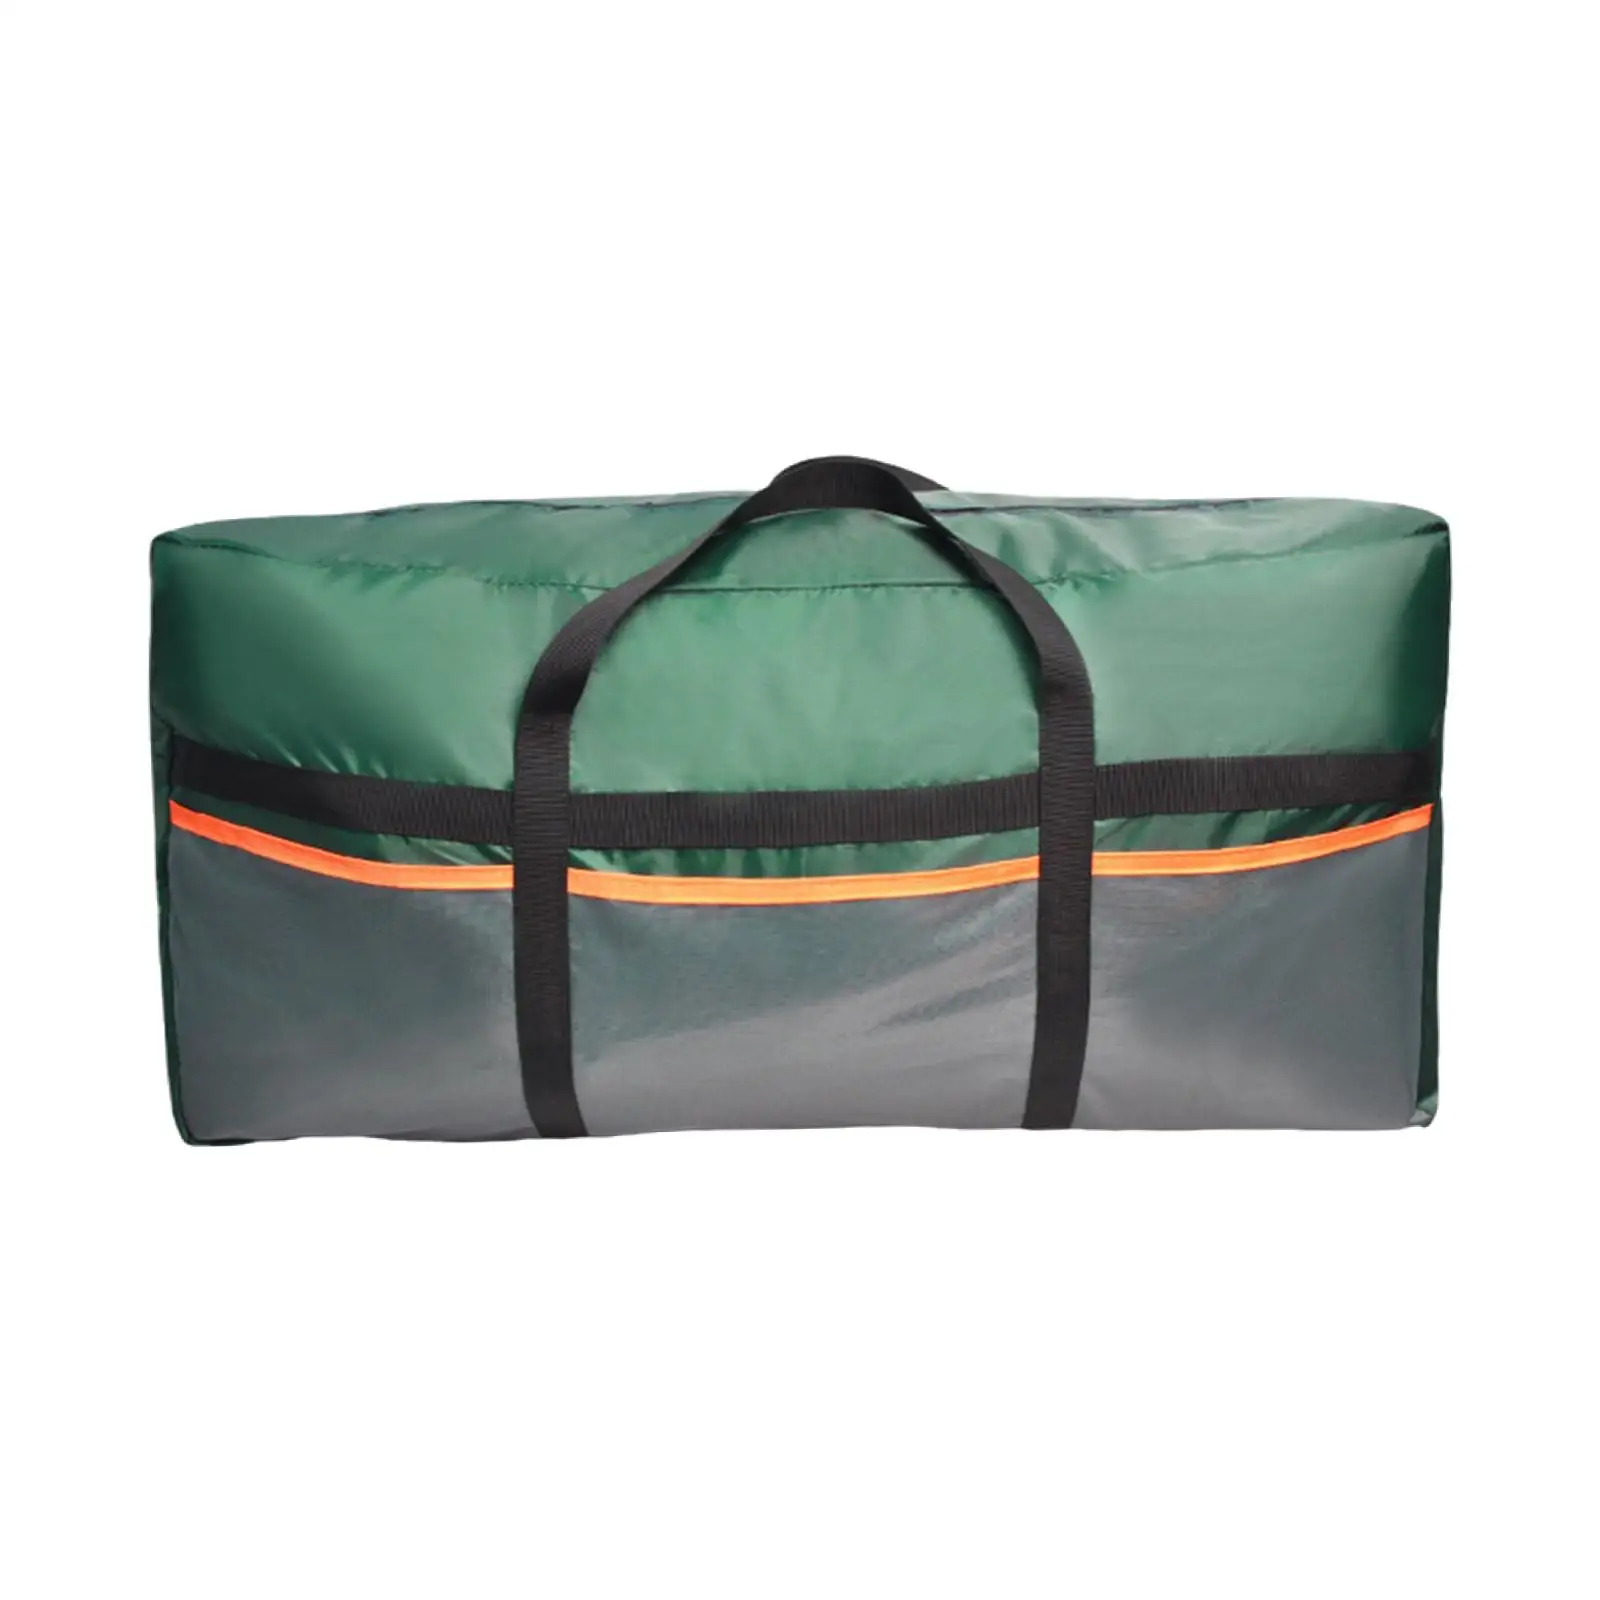 Tent Storage Bag Durable Lightweight Carrying Bag Clothes Bags Case Zippered Duffel Bag for Travel Picnic Hiking Work Equipment